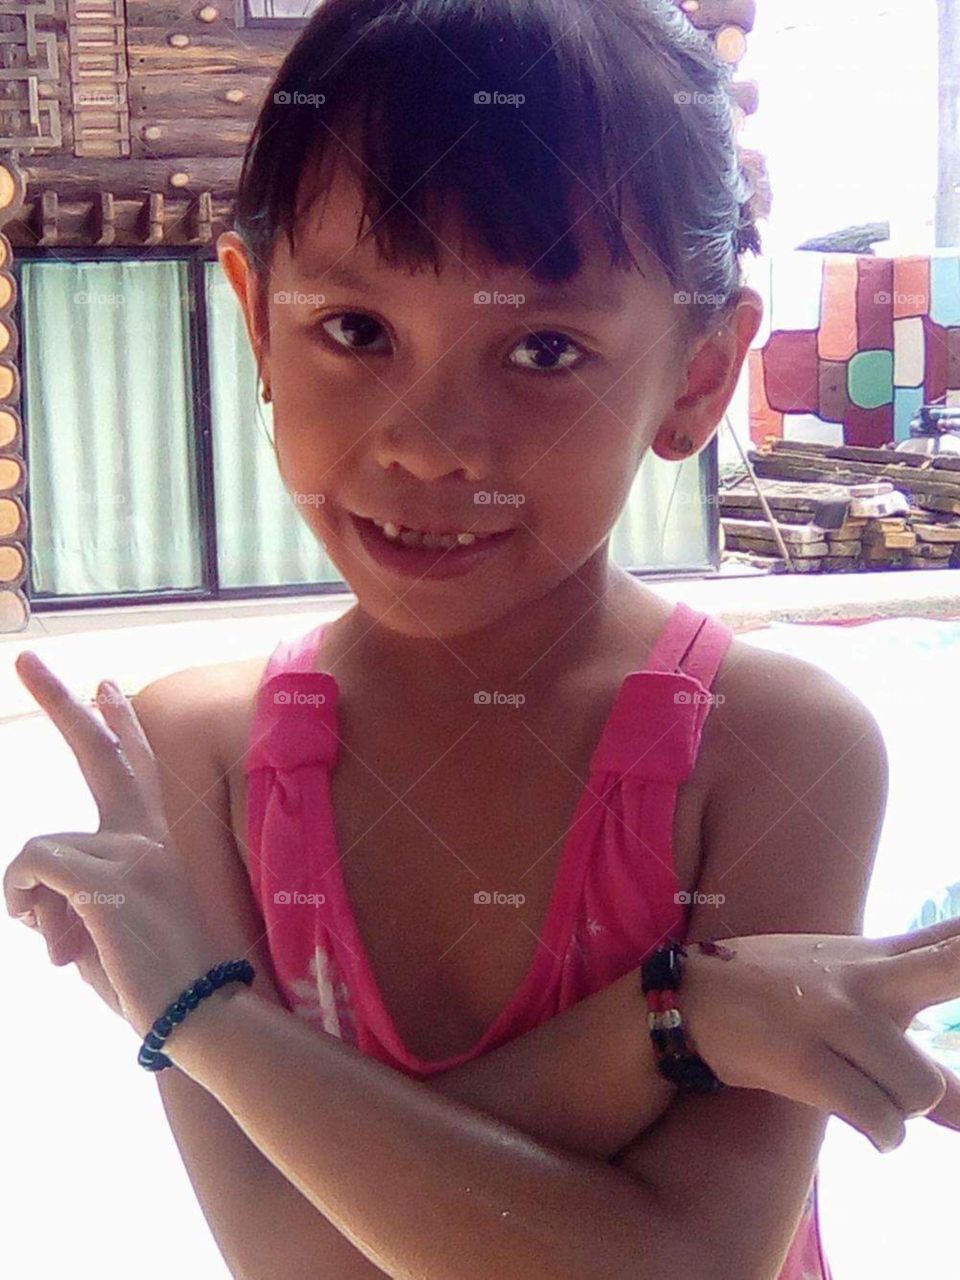 Our 6 year old  daughter Sheikha on her first scouting trip at aged 6, in Lucena, Philippines.
